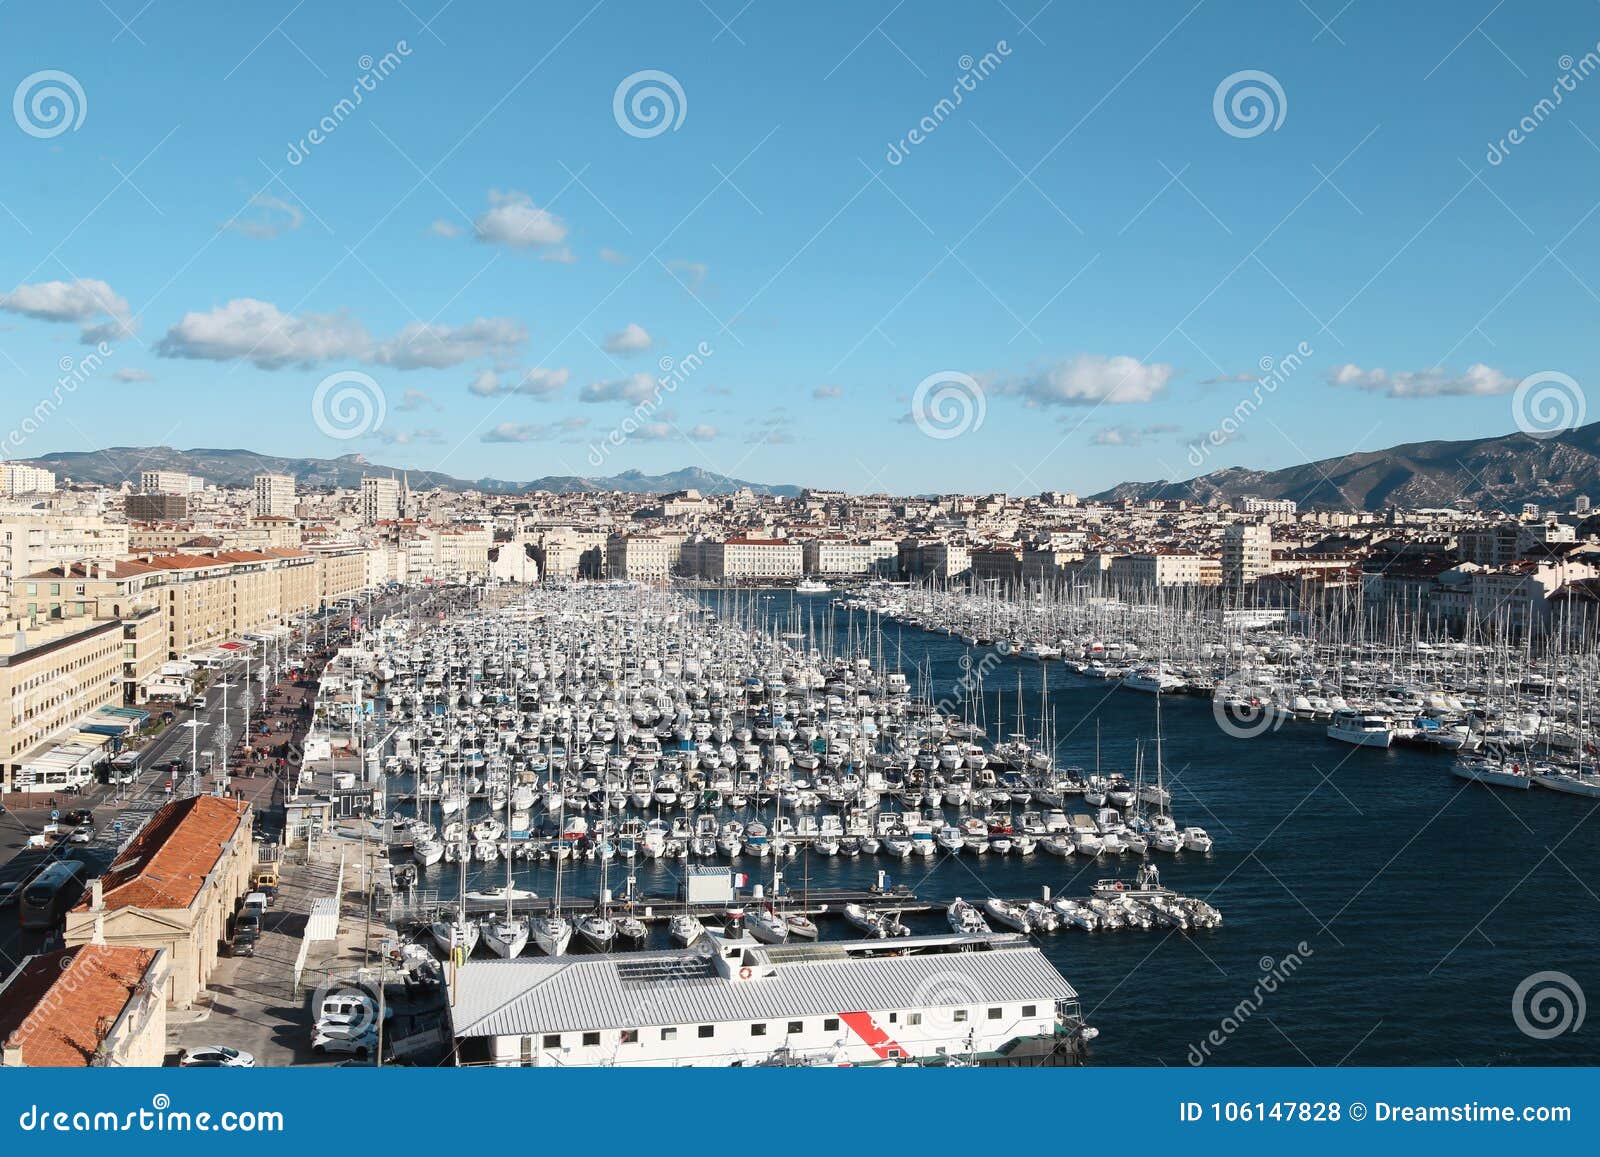 concentrated boats in old-port old marseilles